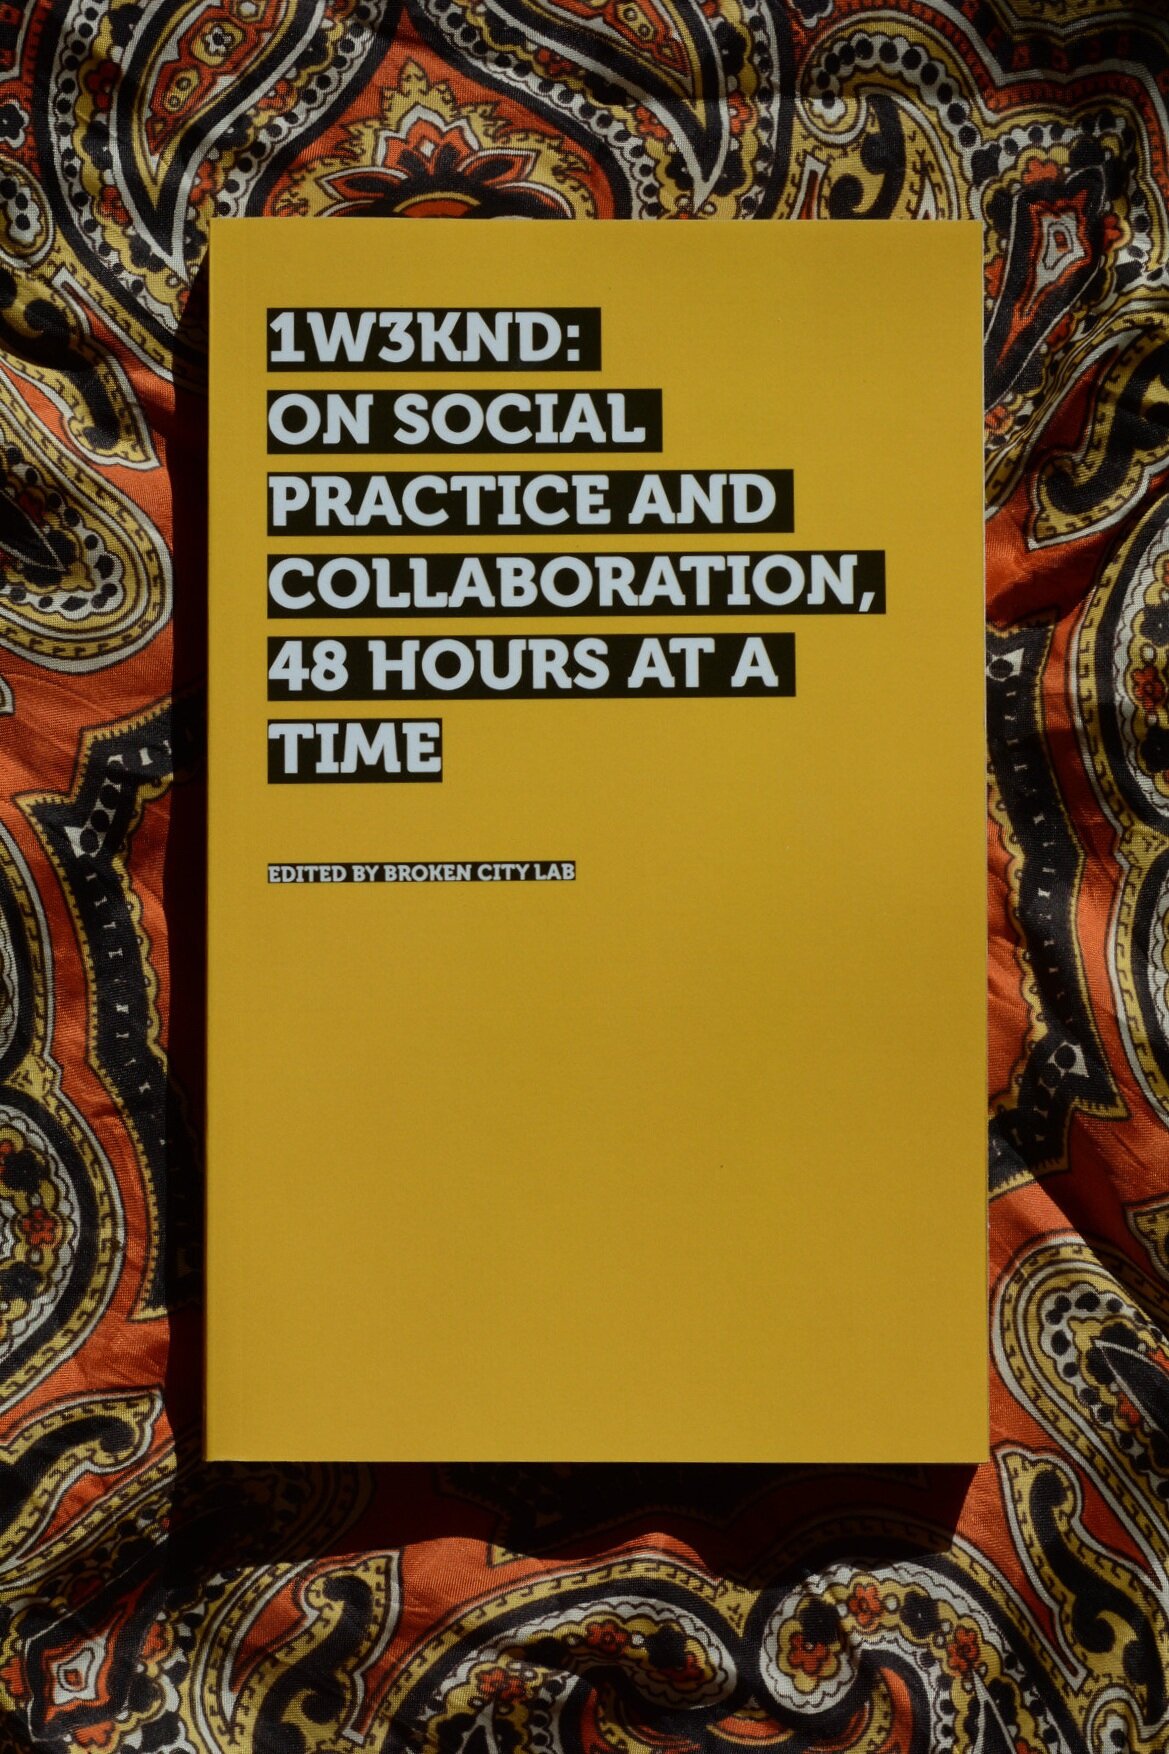 1W3KND_book_cover_4x6.jpg